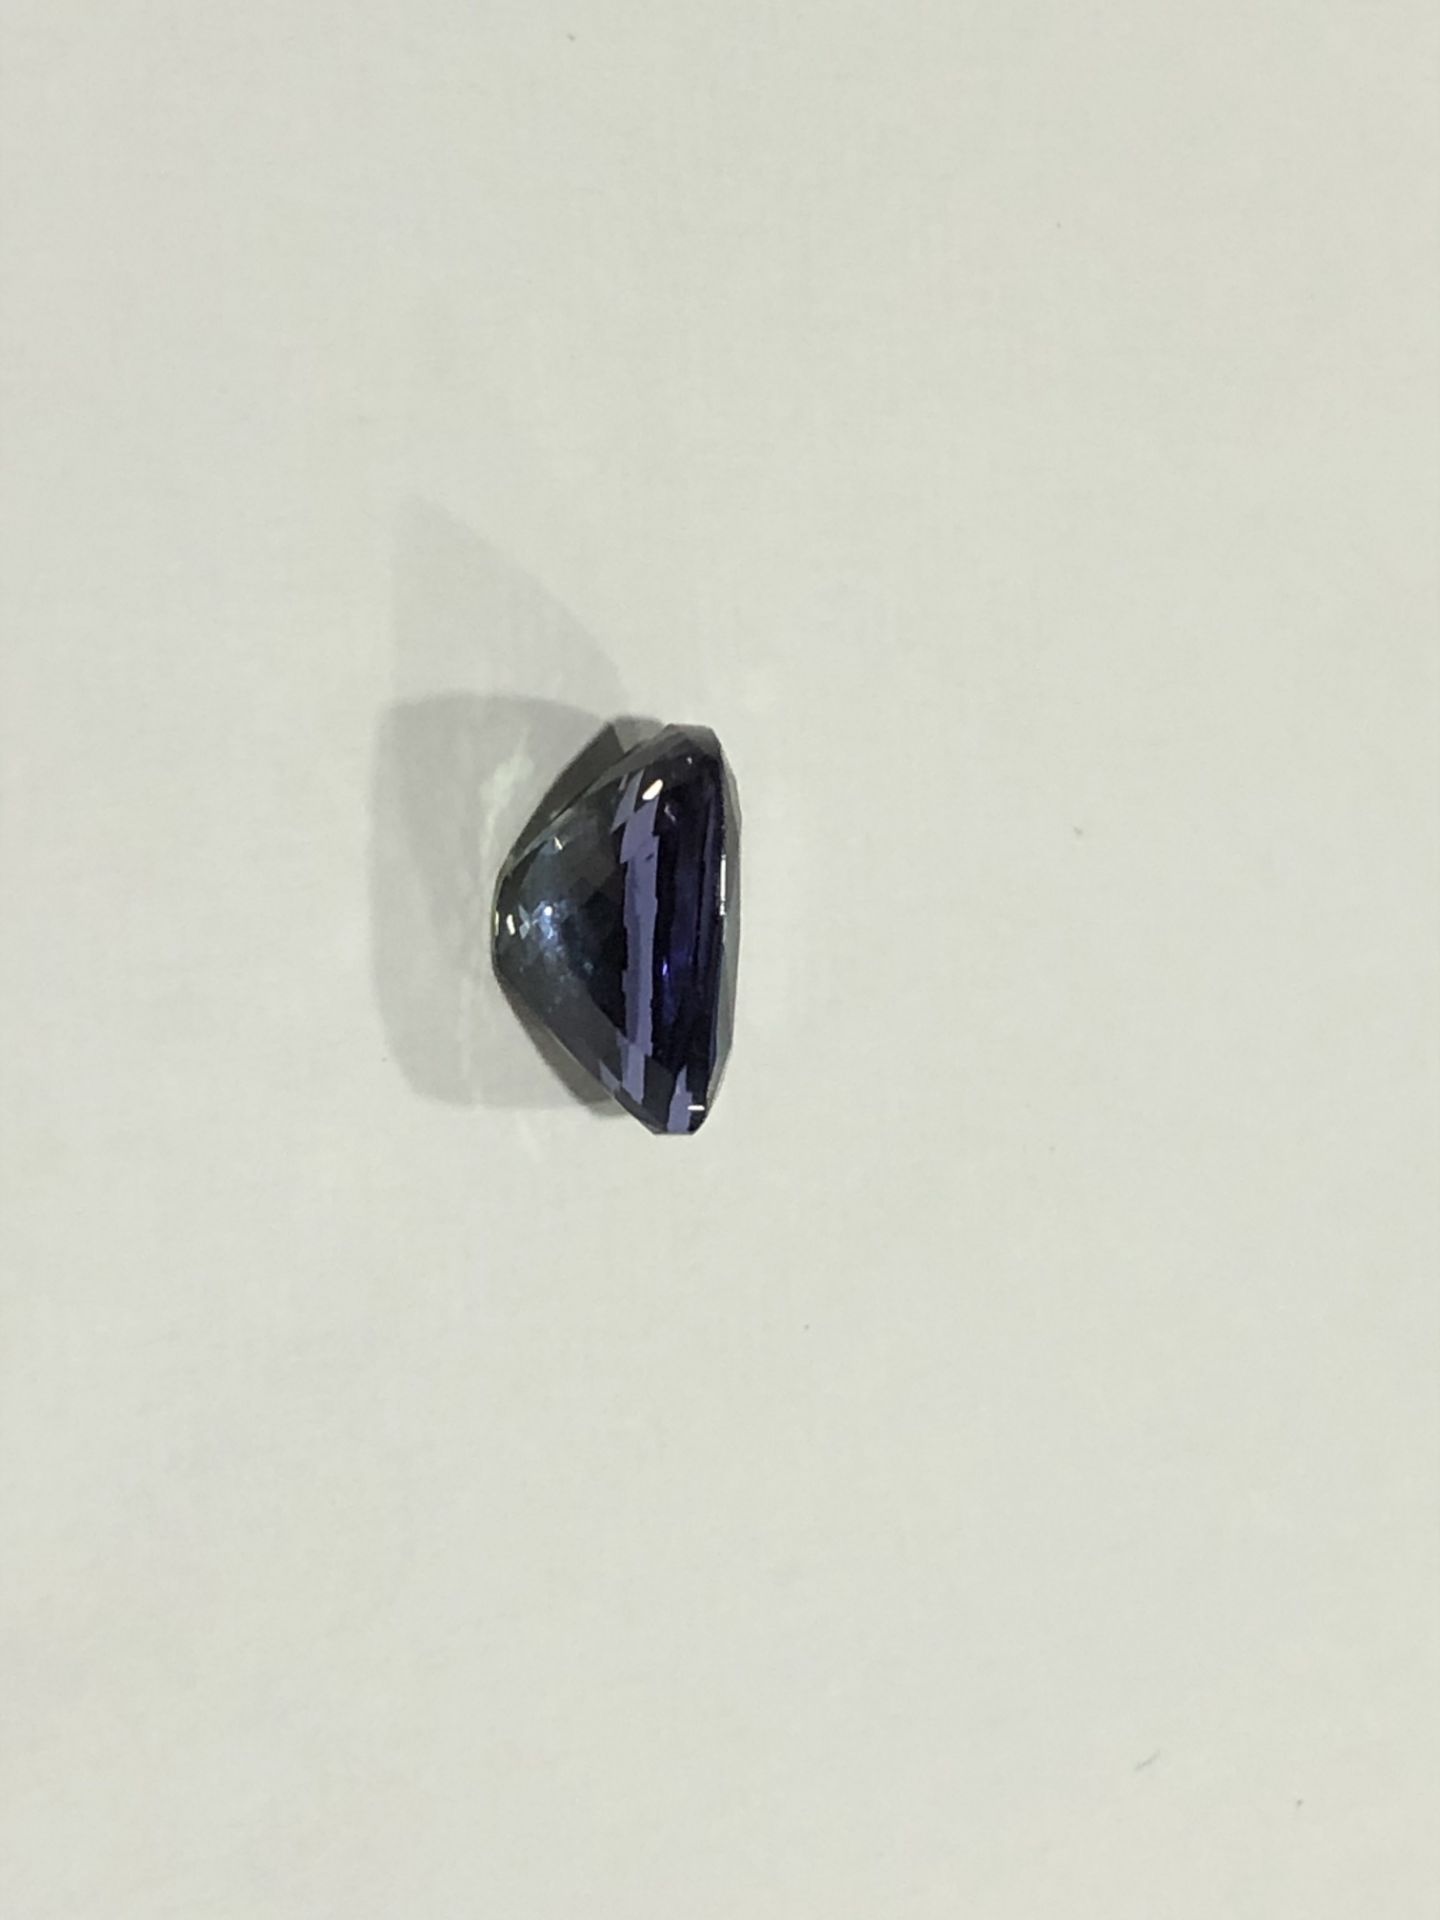 6.61ct Natural Tanzanite with GIA Certificate - Image 7 of 8